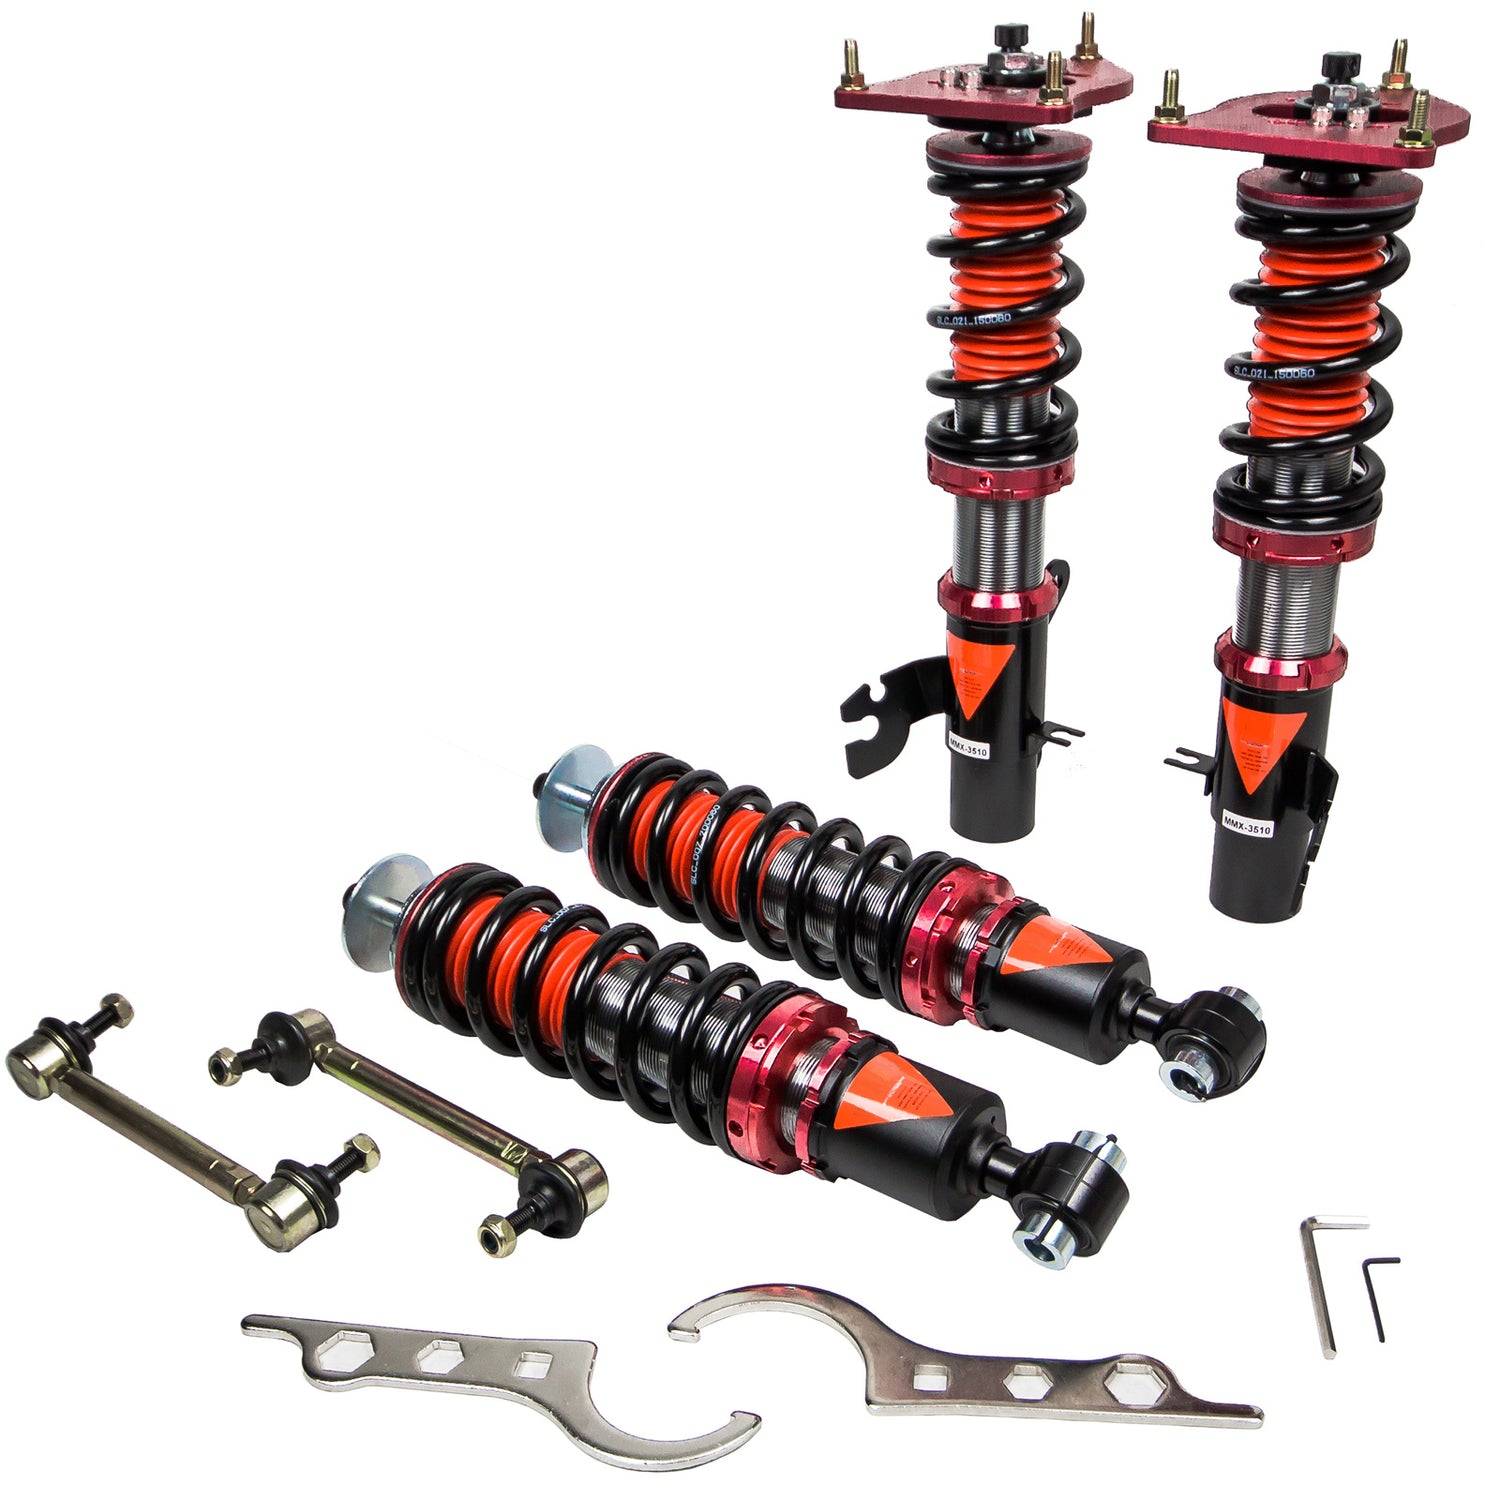 MMX3510-B MAXX Coilovers Lowering Kit, Fully Adjustable, Ride Height, 40 Clicks Rebound Settings, MINI Cooper(R50) 01-06